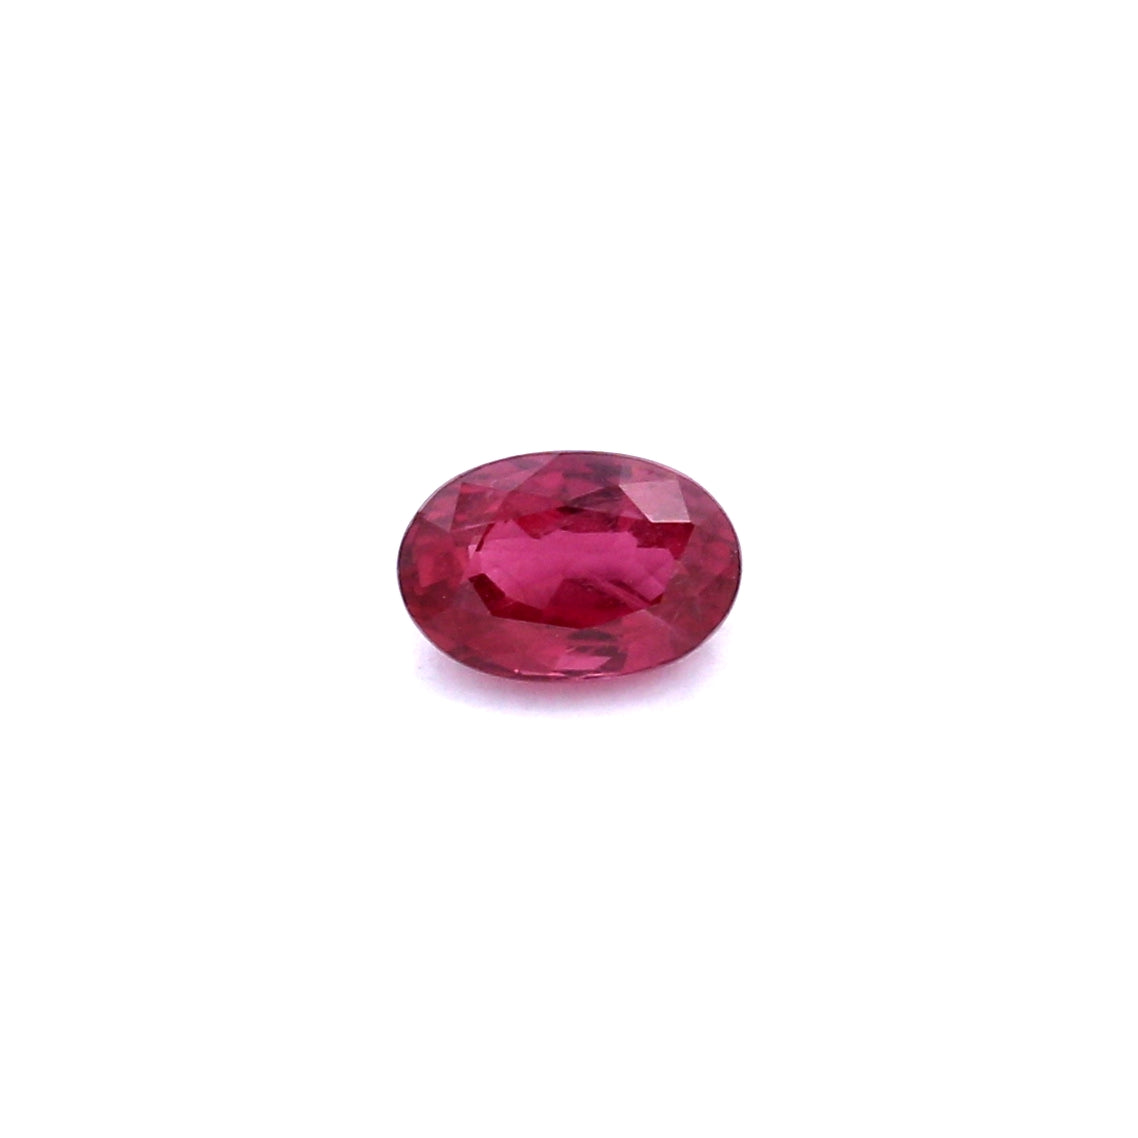 0.71ct Pinkish Red, Oval Ruby, Heated, Thailand - 6.05 x 4.06 x 3.08mm